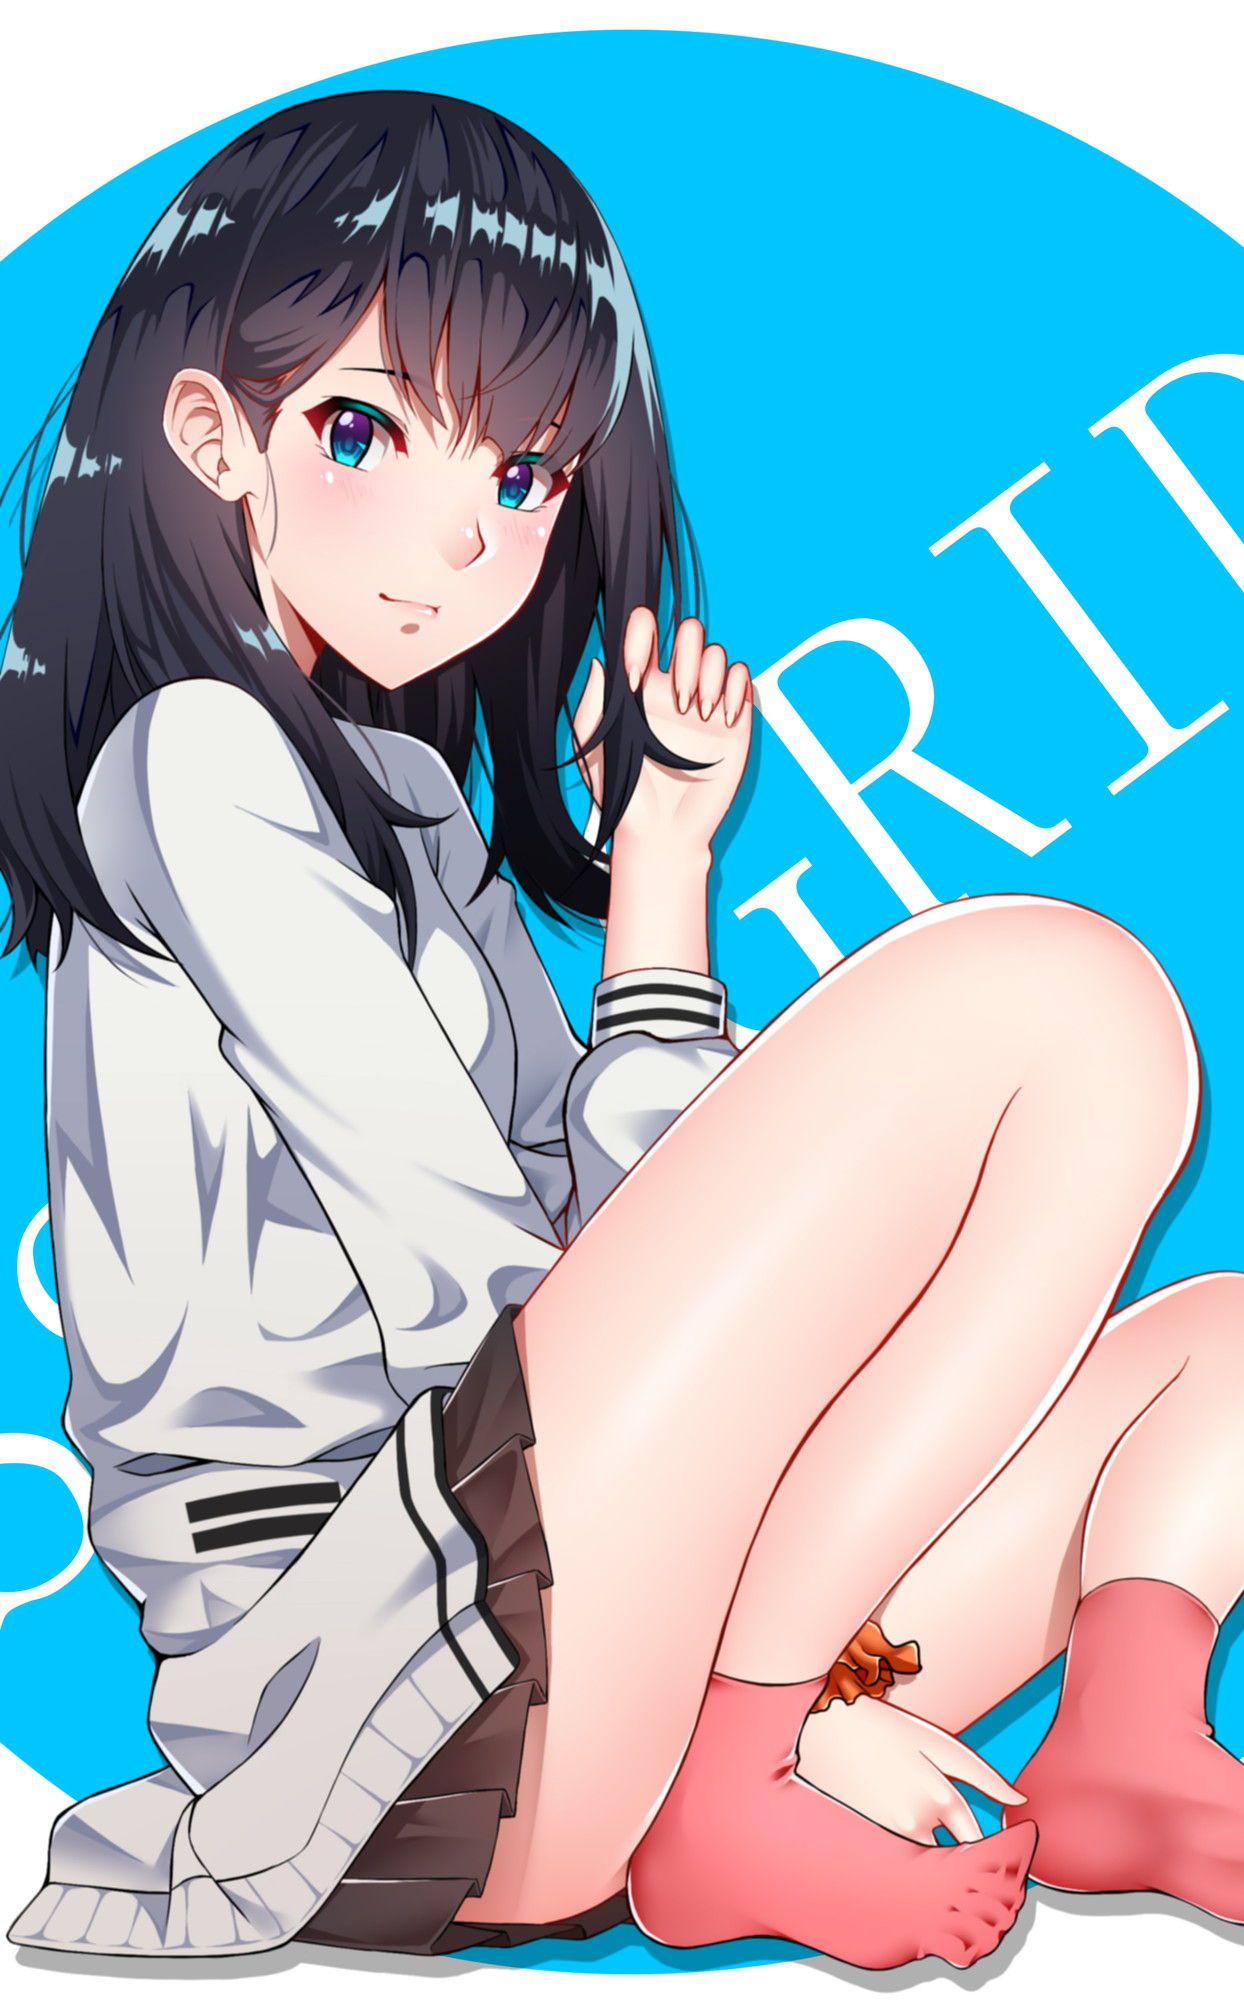 SSSS. GRIDMAN's image warehouse is here! 4